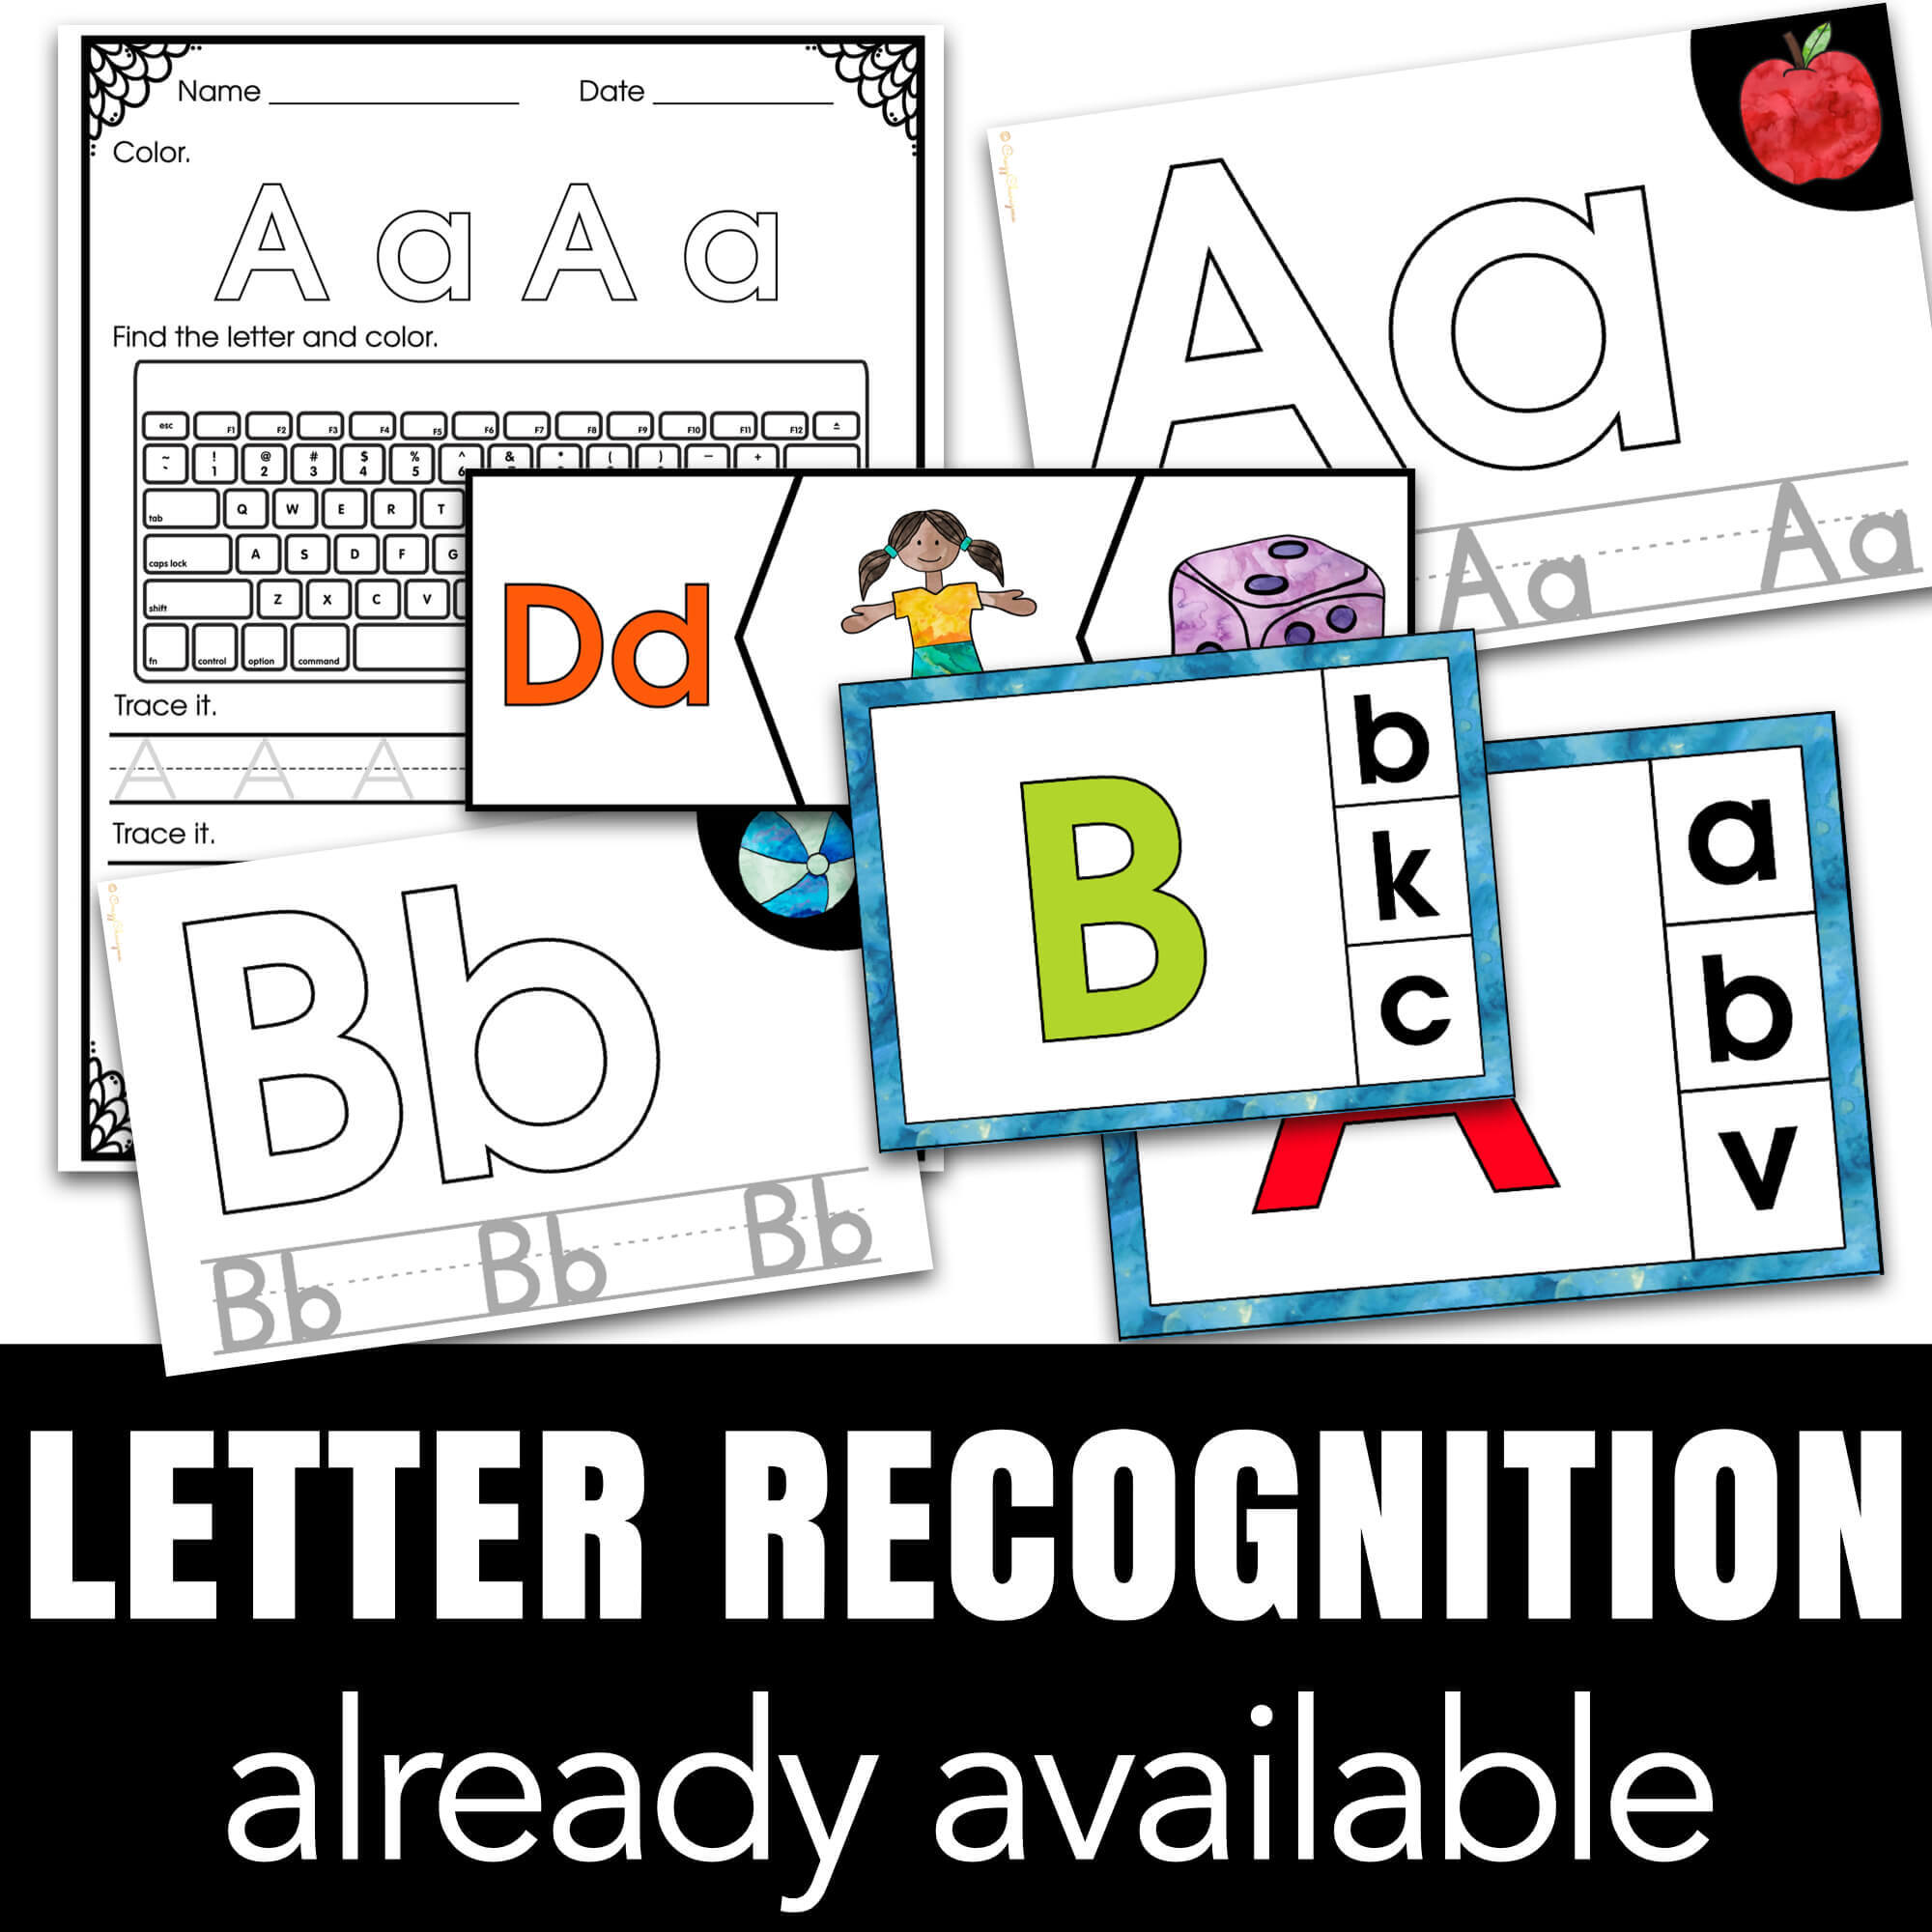 Letter formation and recognition